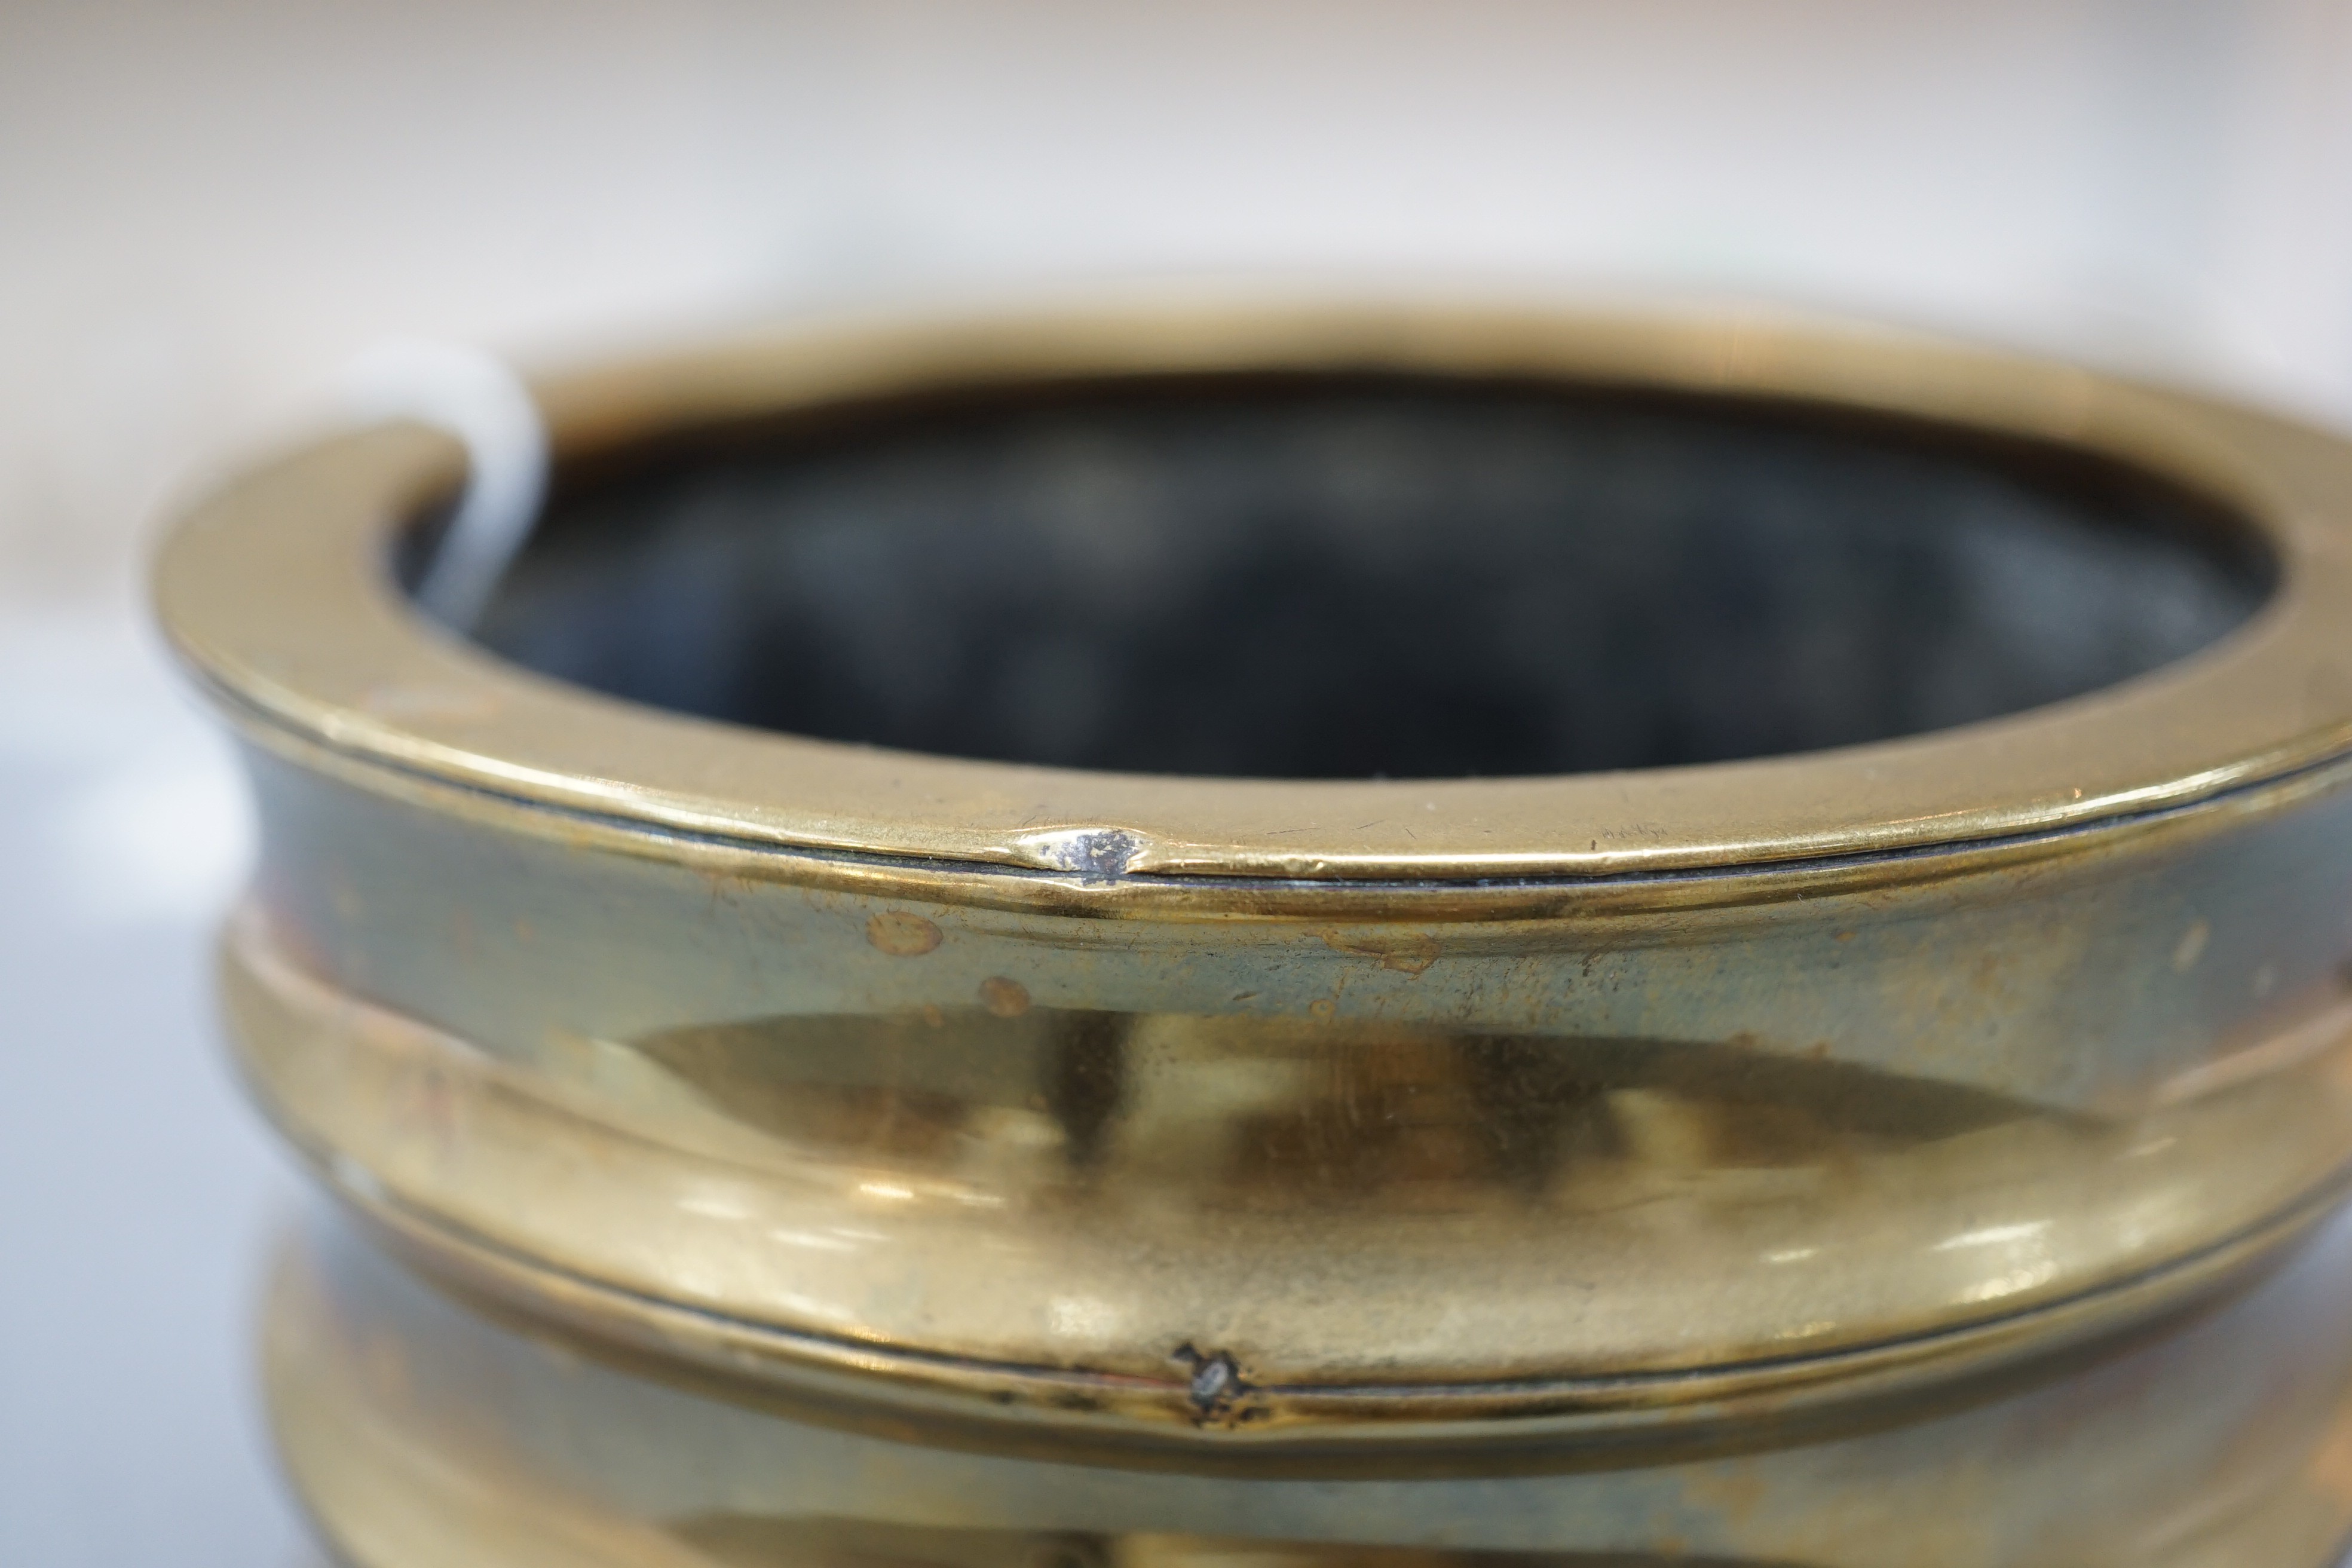 A Chinese bronze censer, two character Xuande seal mark, 18th century, 10.4cm high, 12.1cm diameter, small dents